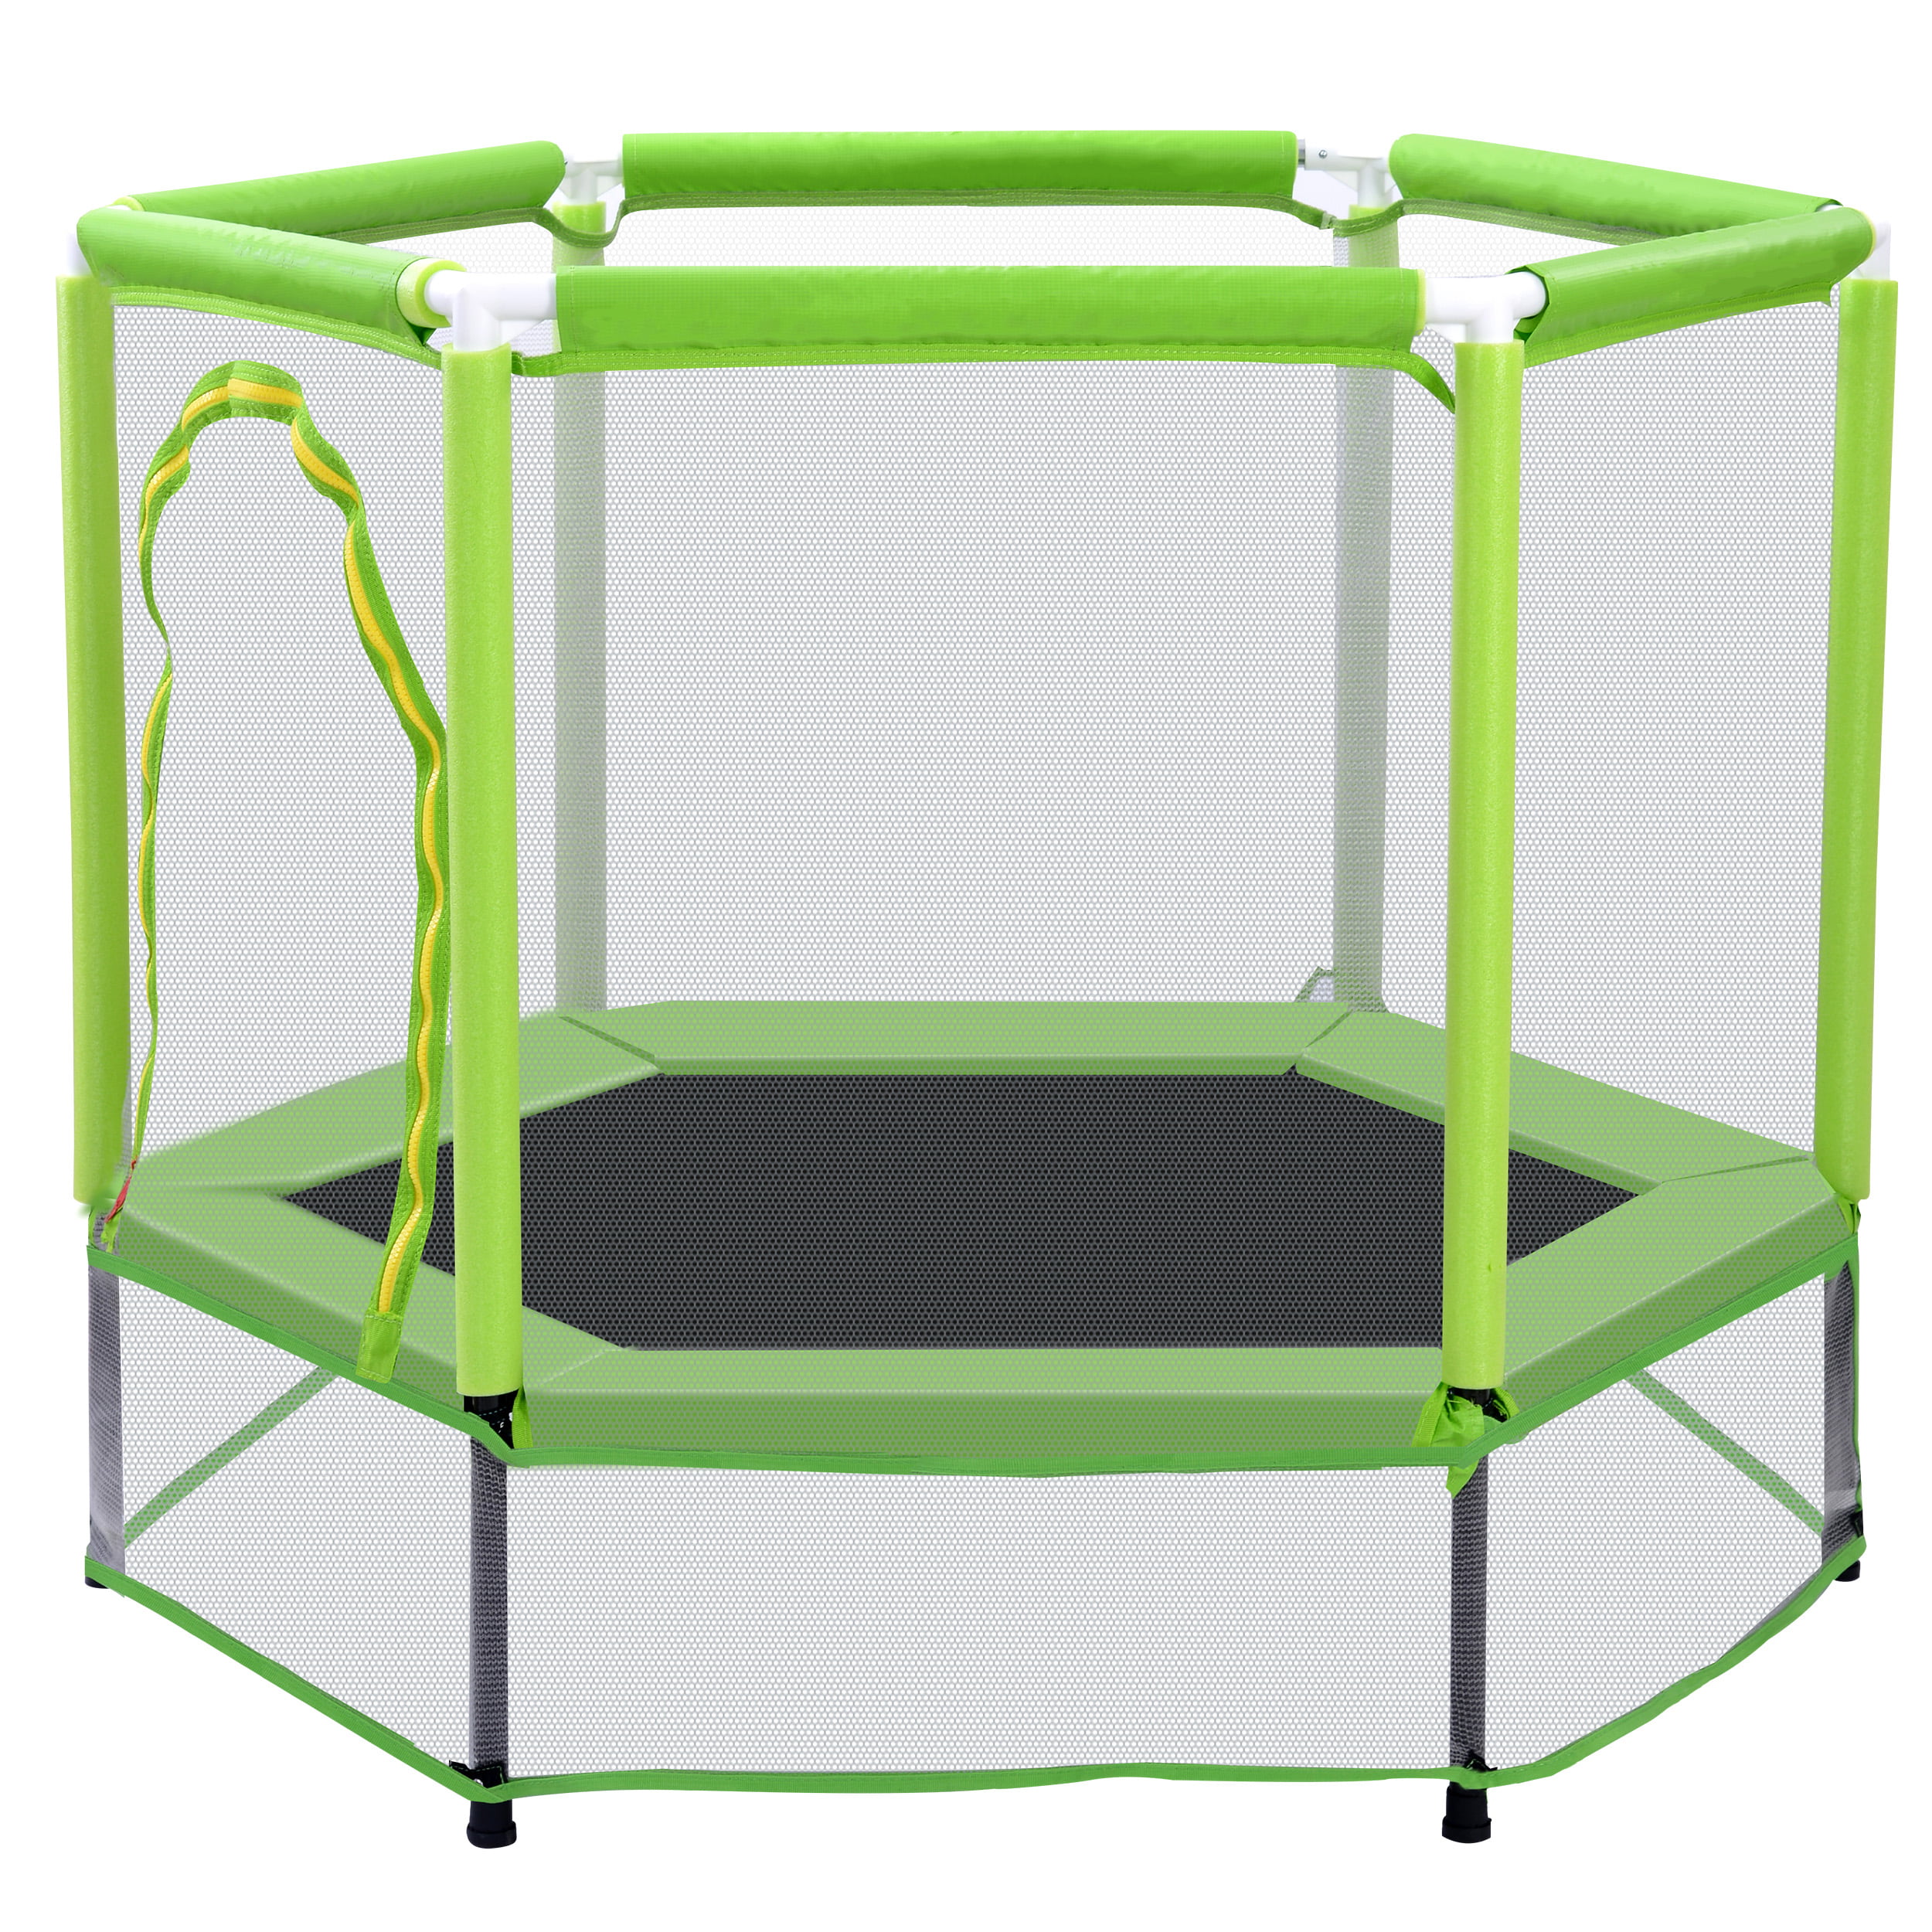 55” Toddlers Trampoline with Safety Enclosure Net and Balls, Indoor Outdoor Mini Trampoline for Kids